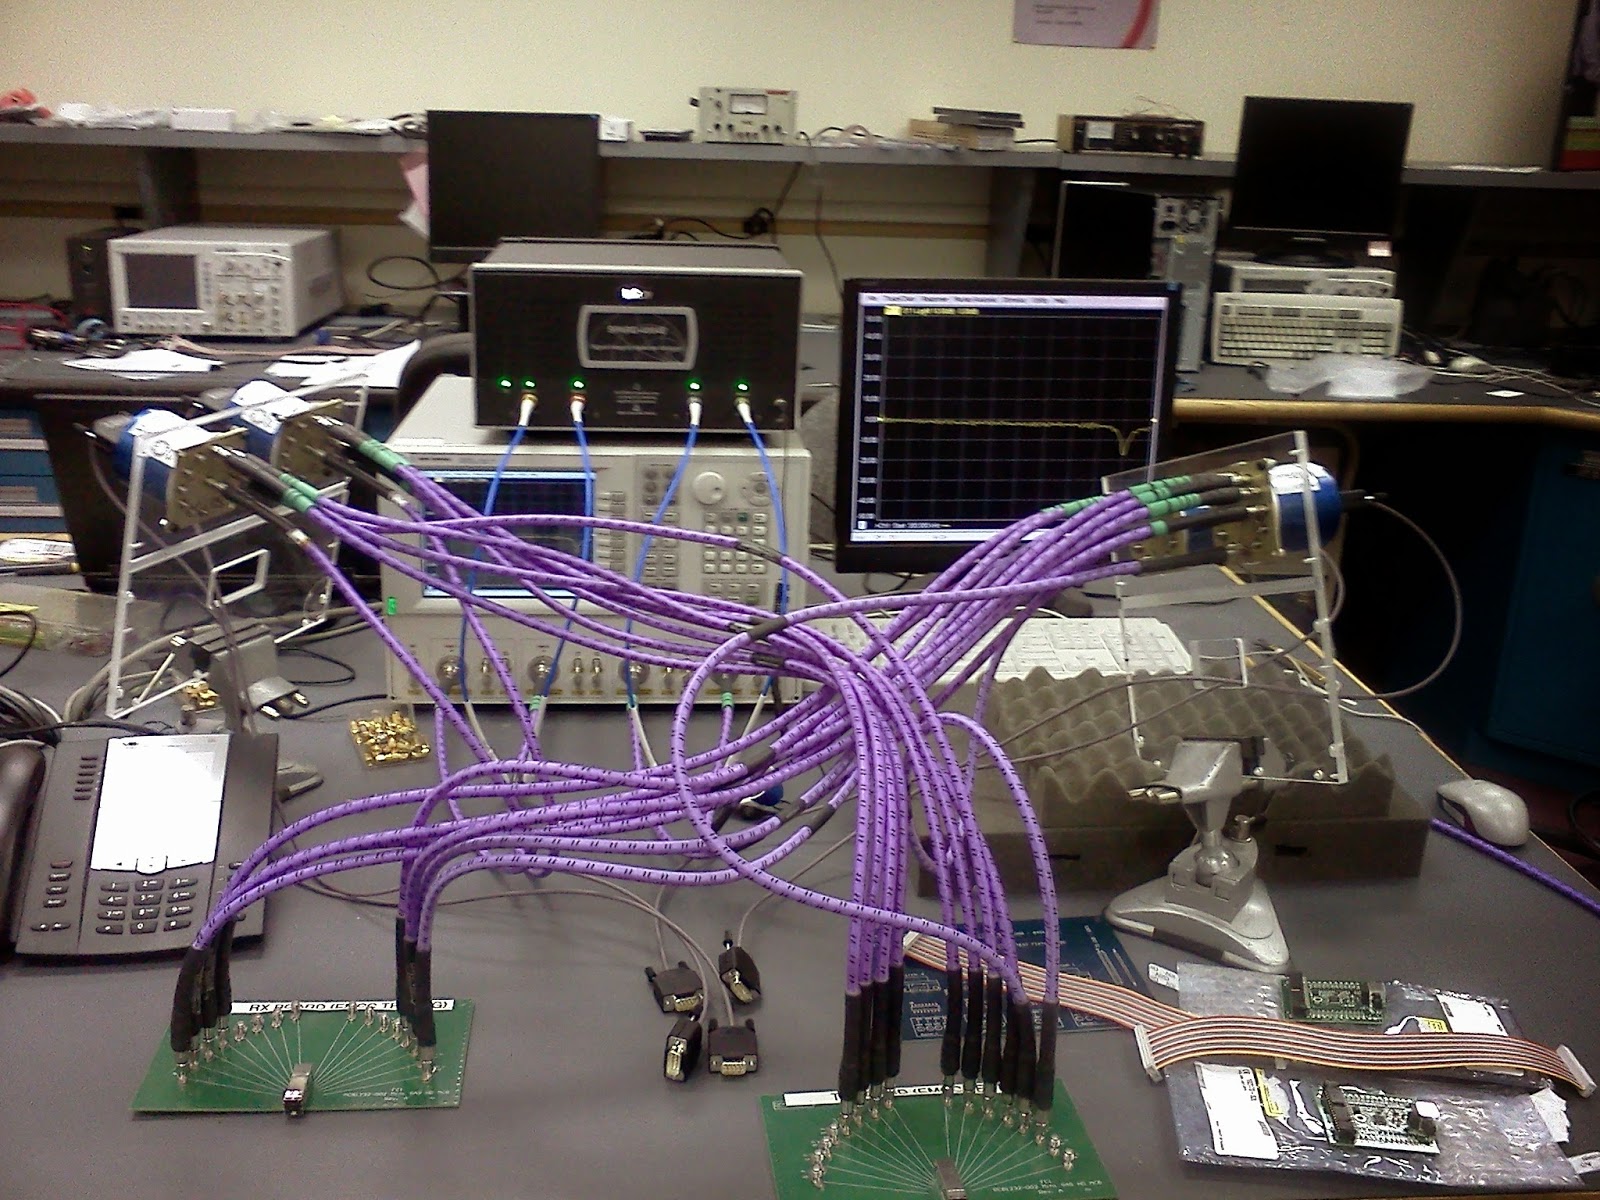 Various lab devices in the background with partially loaded SP12T Radiall switches mounted to a plexiglass frame in the foreground.